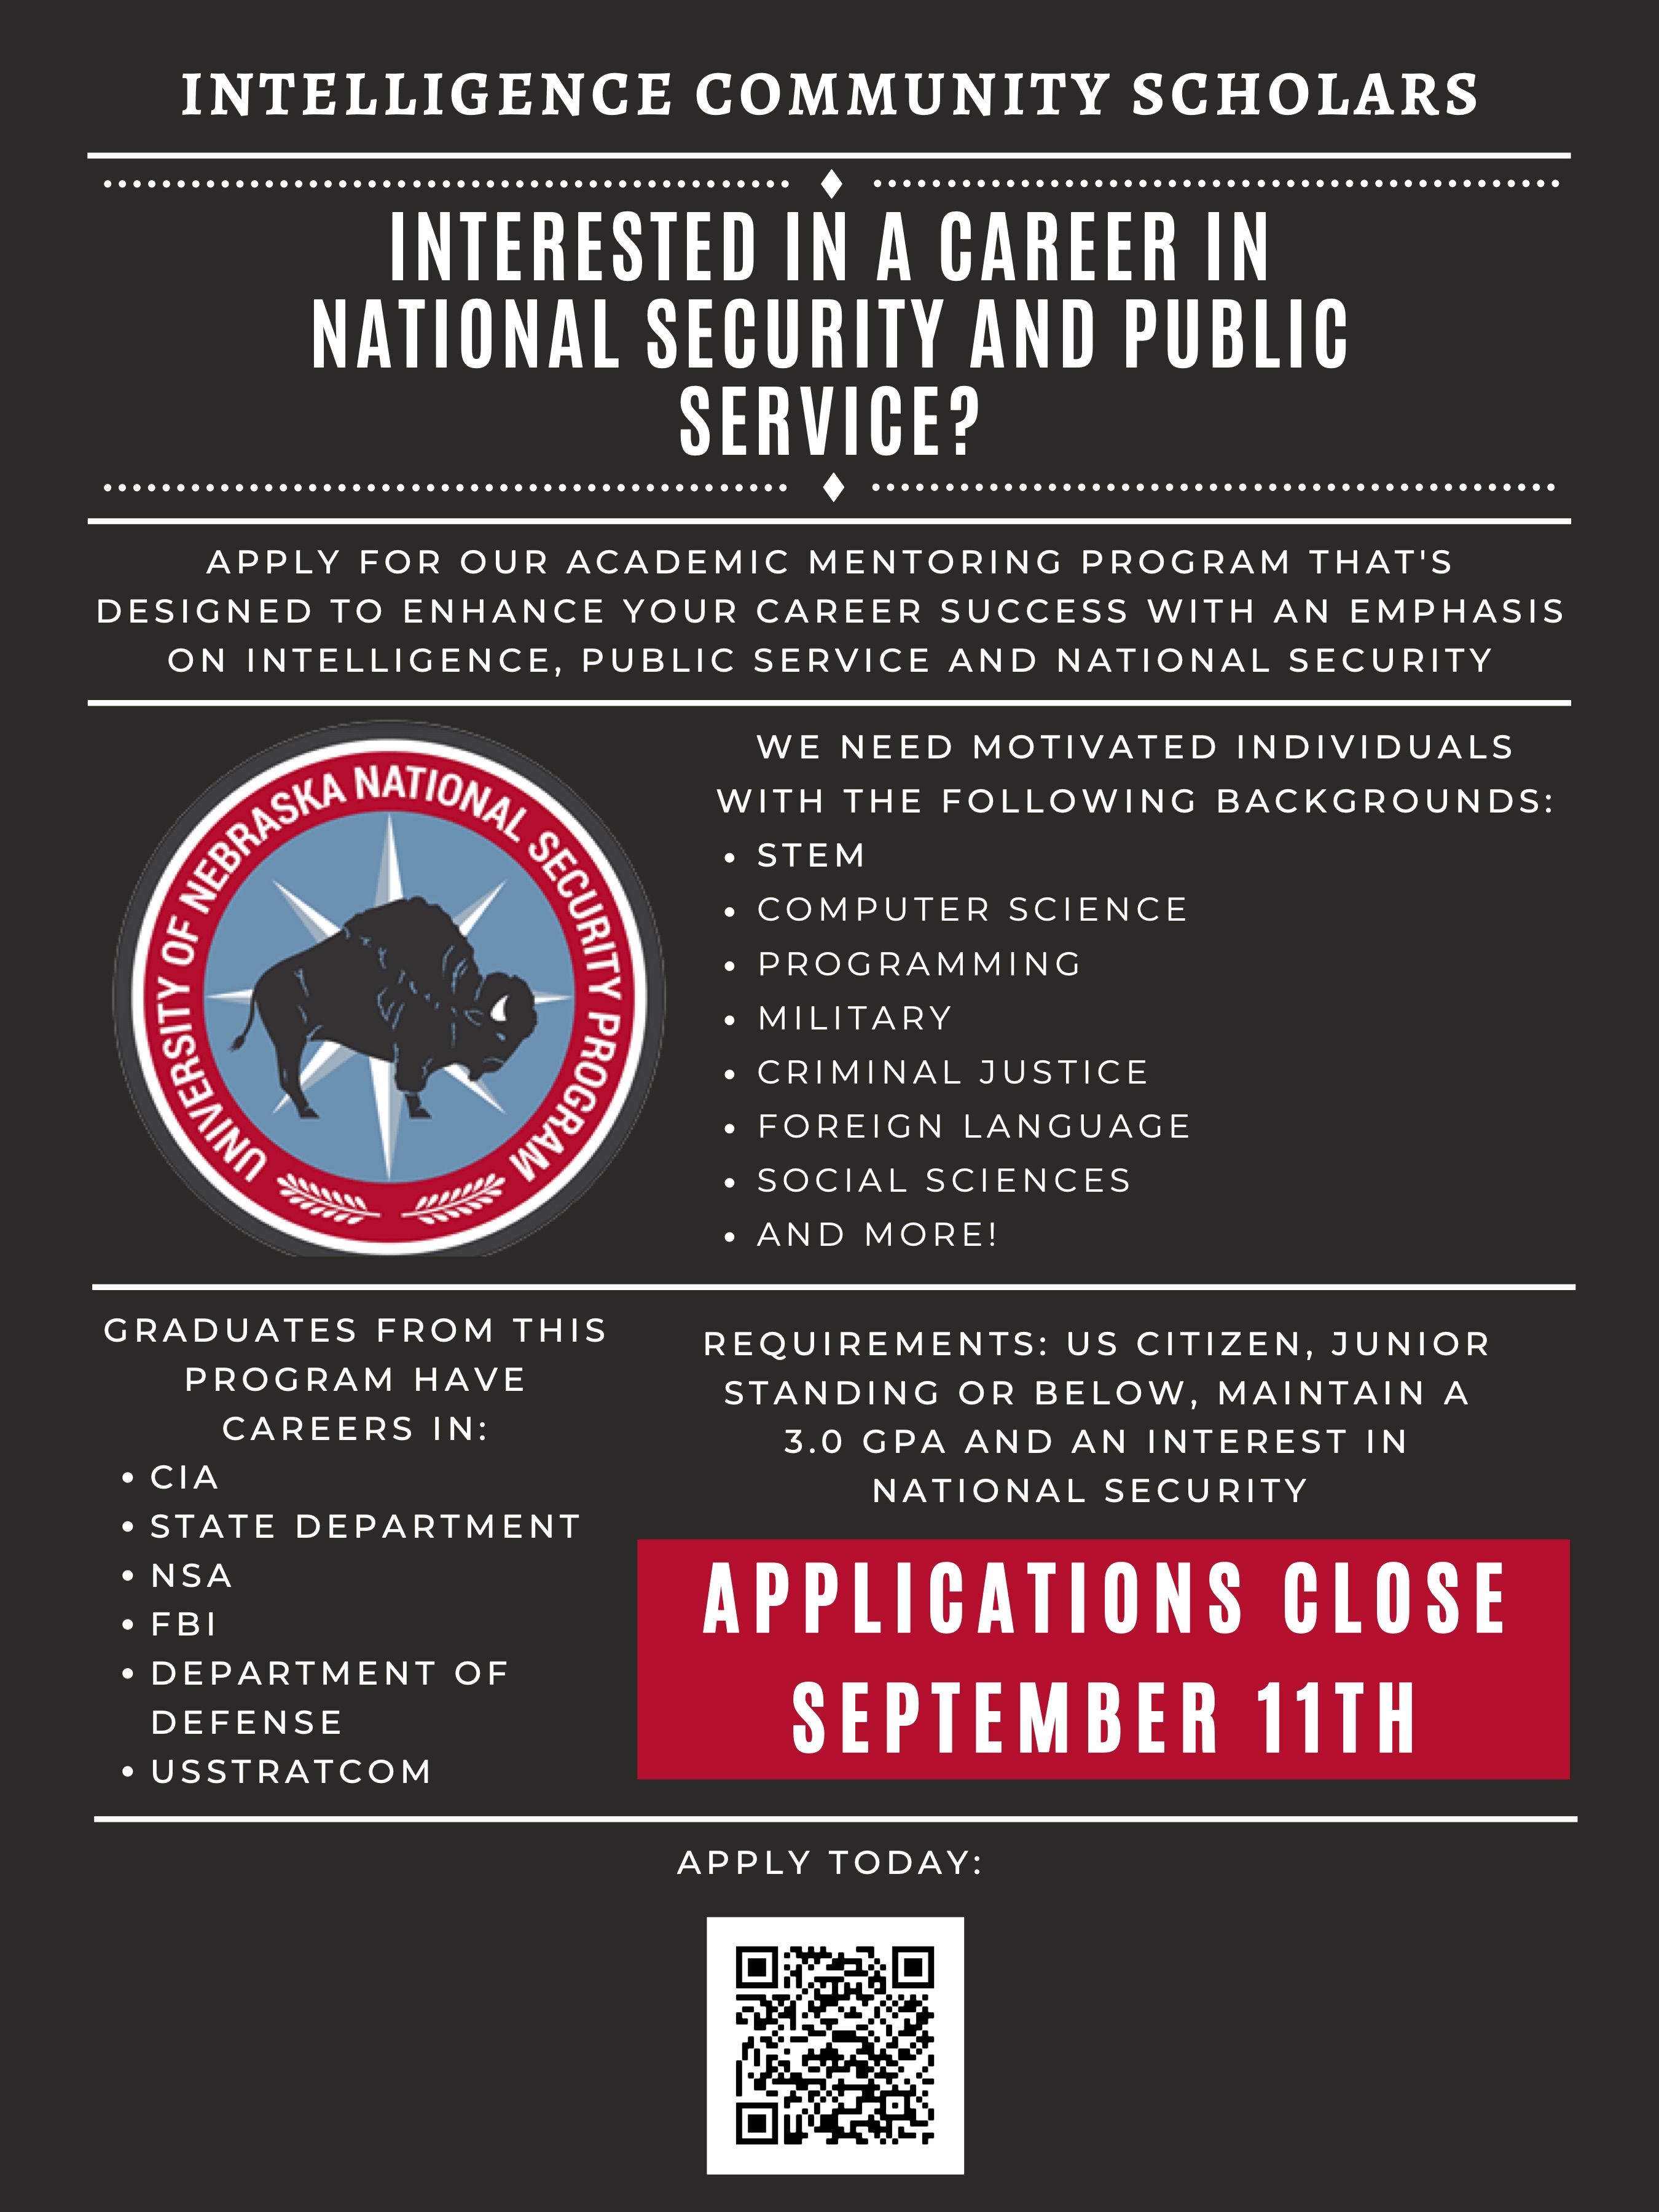 Intelligence Community Scholars accepting applications | Announce ...